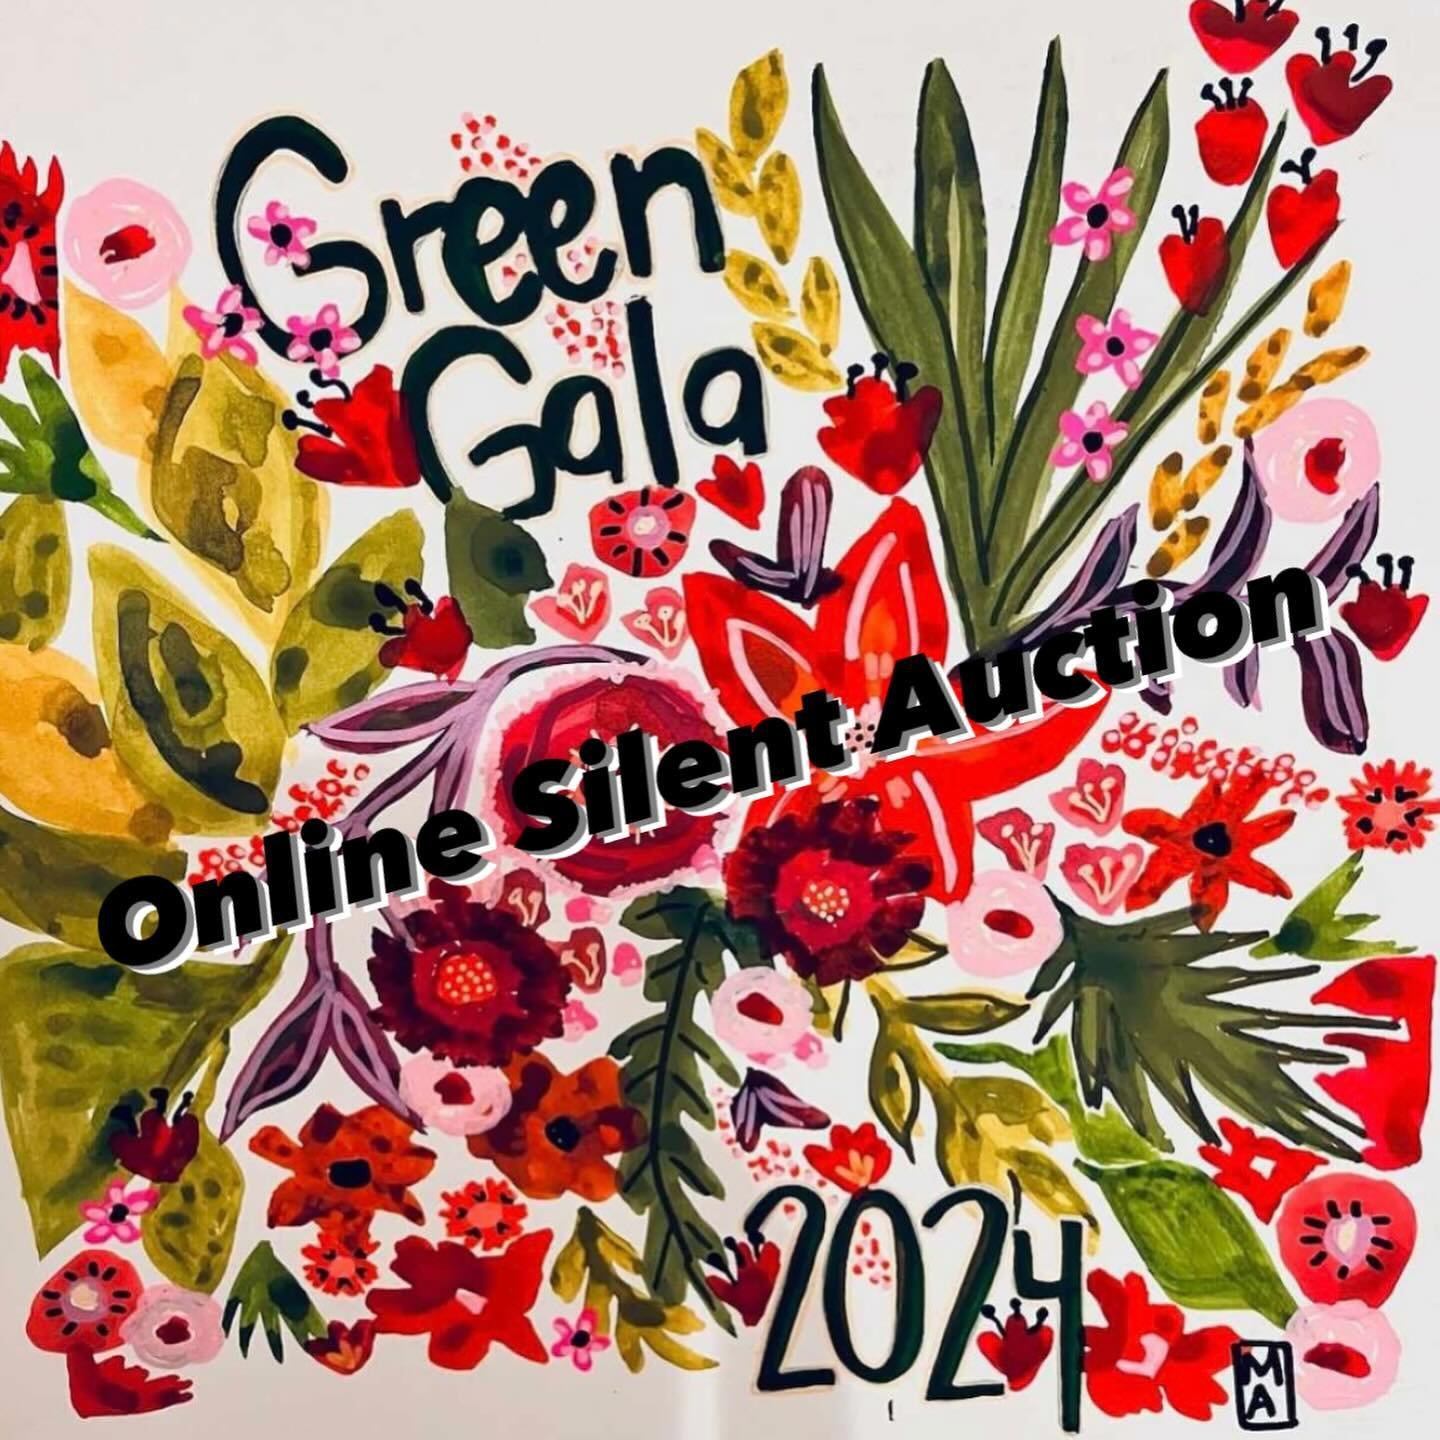 New items alert in our Silent Auction! Check it out: givebutter.com/c/PlessyGreenGala/auction 
We are adding new items every day until Saturday, April 20 when our Green Gala fundraiser for arts education takes place at 7 pm at the Railyard (plessygre